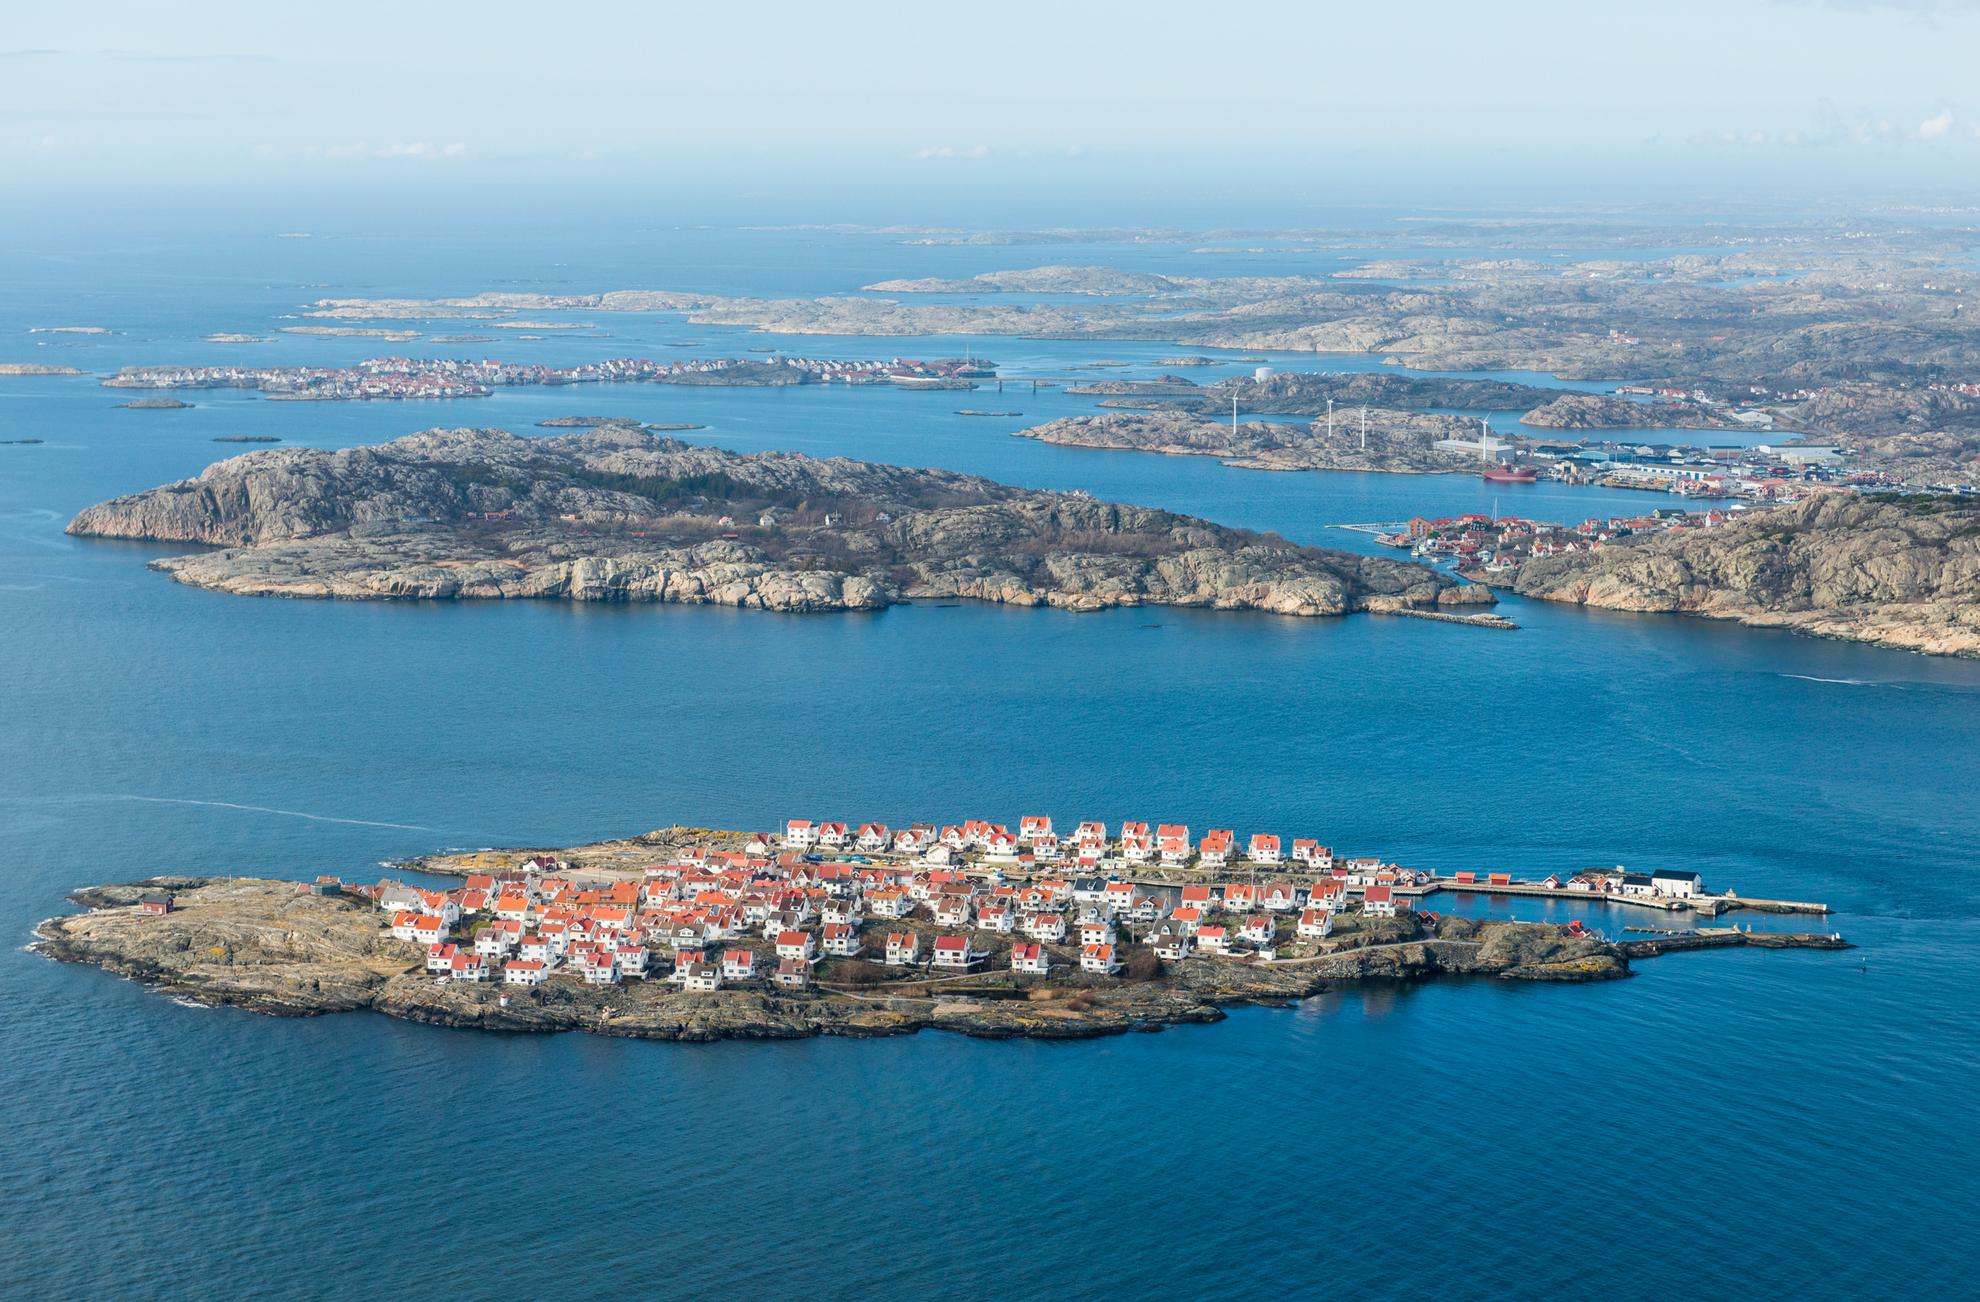 Aerial view of the island Åstol in Bohuslän. The island is filled with white houses.